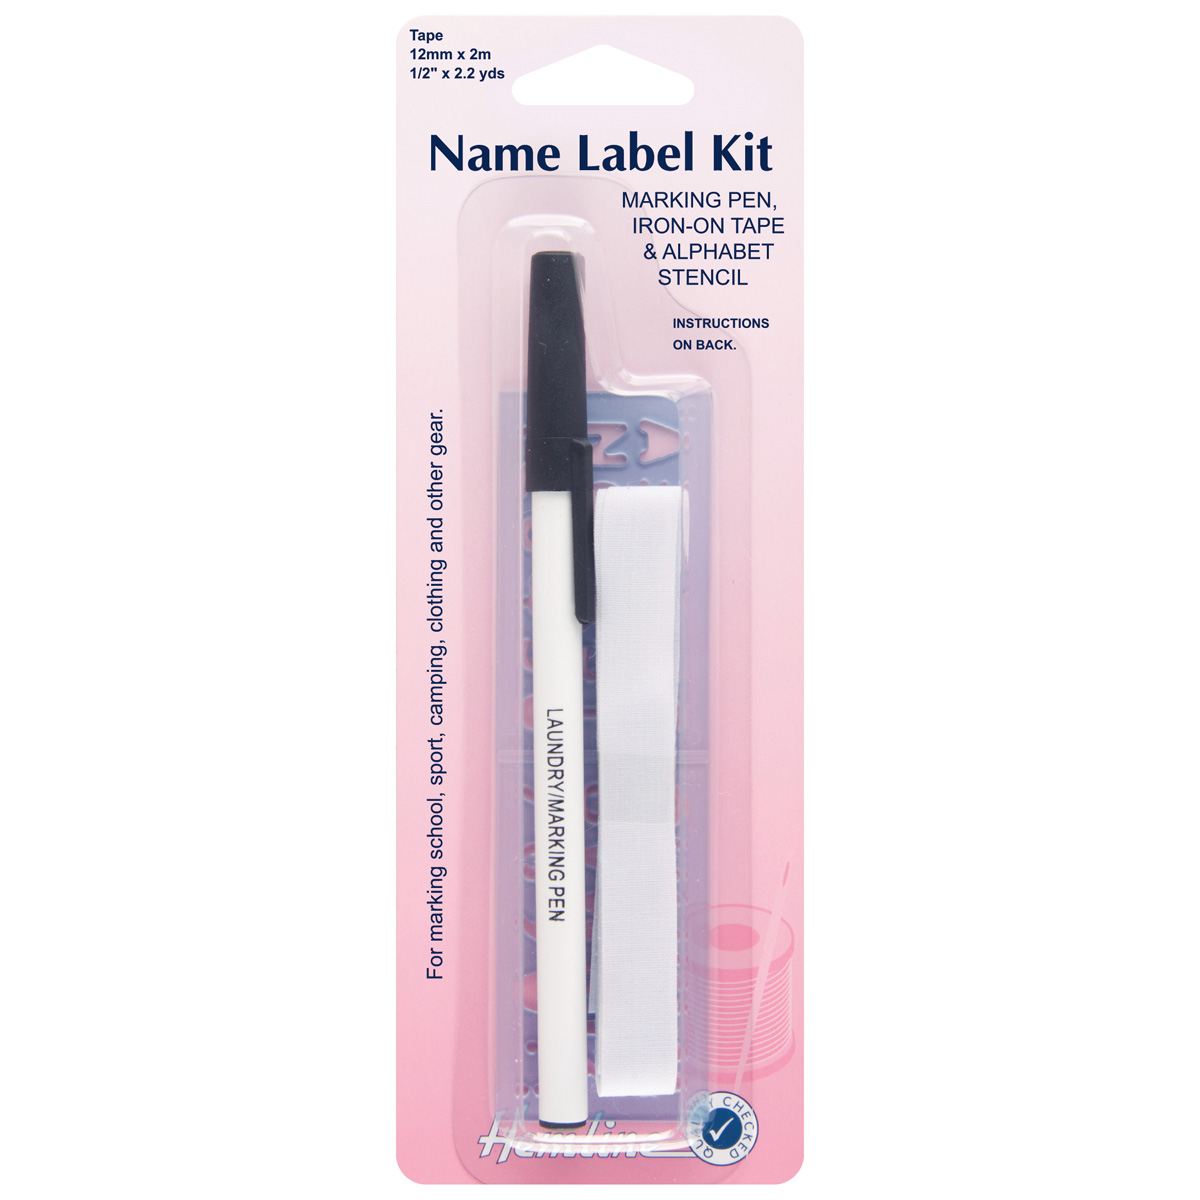 Name Label Kit: Iron on tape with Pen and Stencil